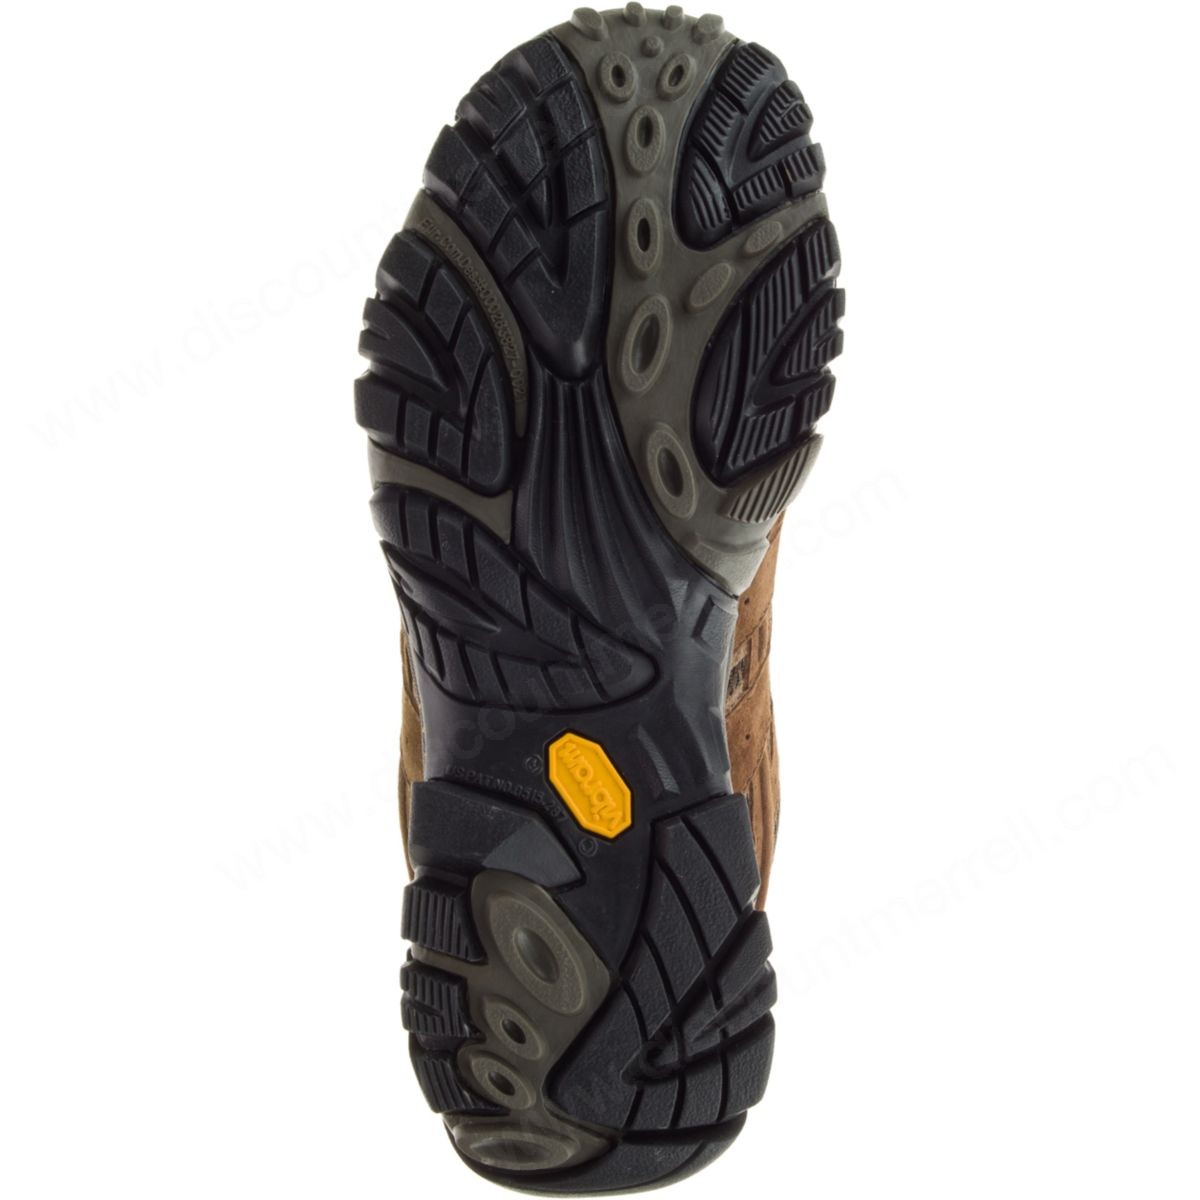 Merrell Man's Moab Mother Of All Boots™ Mid Waterproof Earth - -1